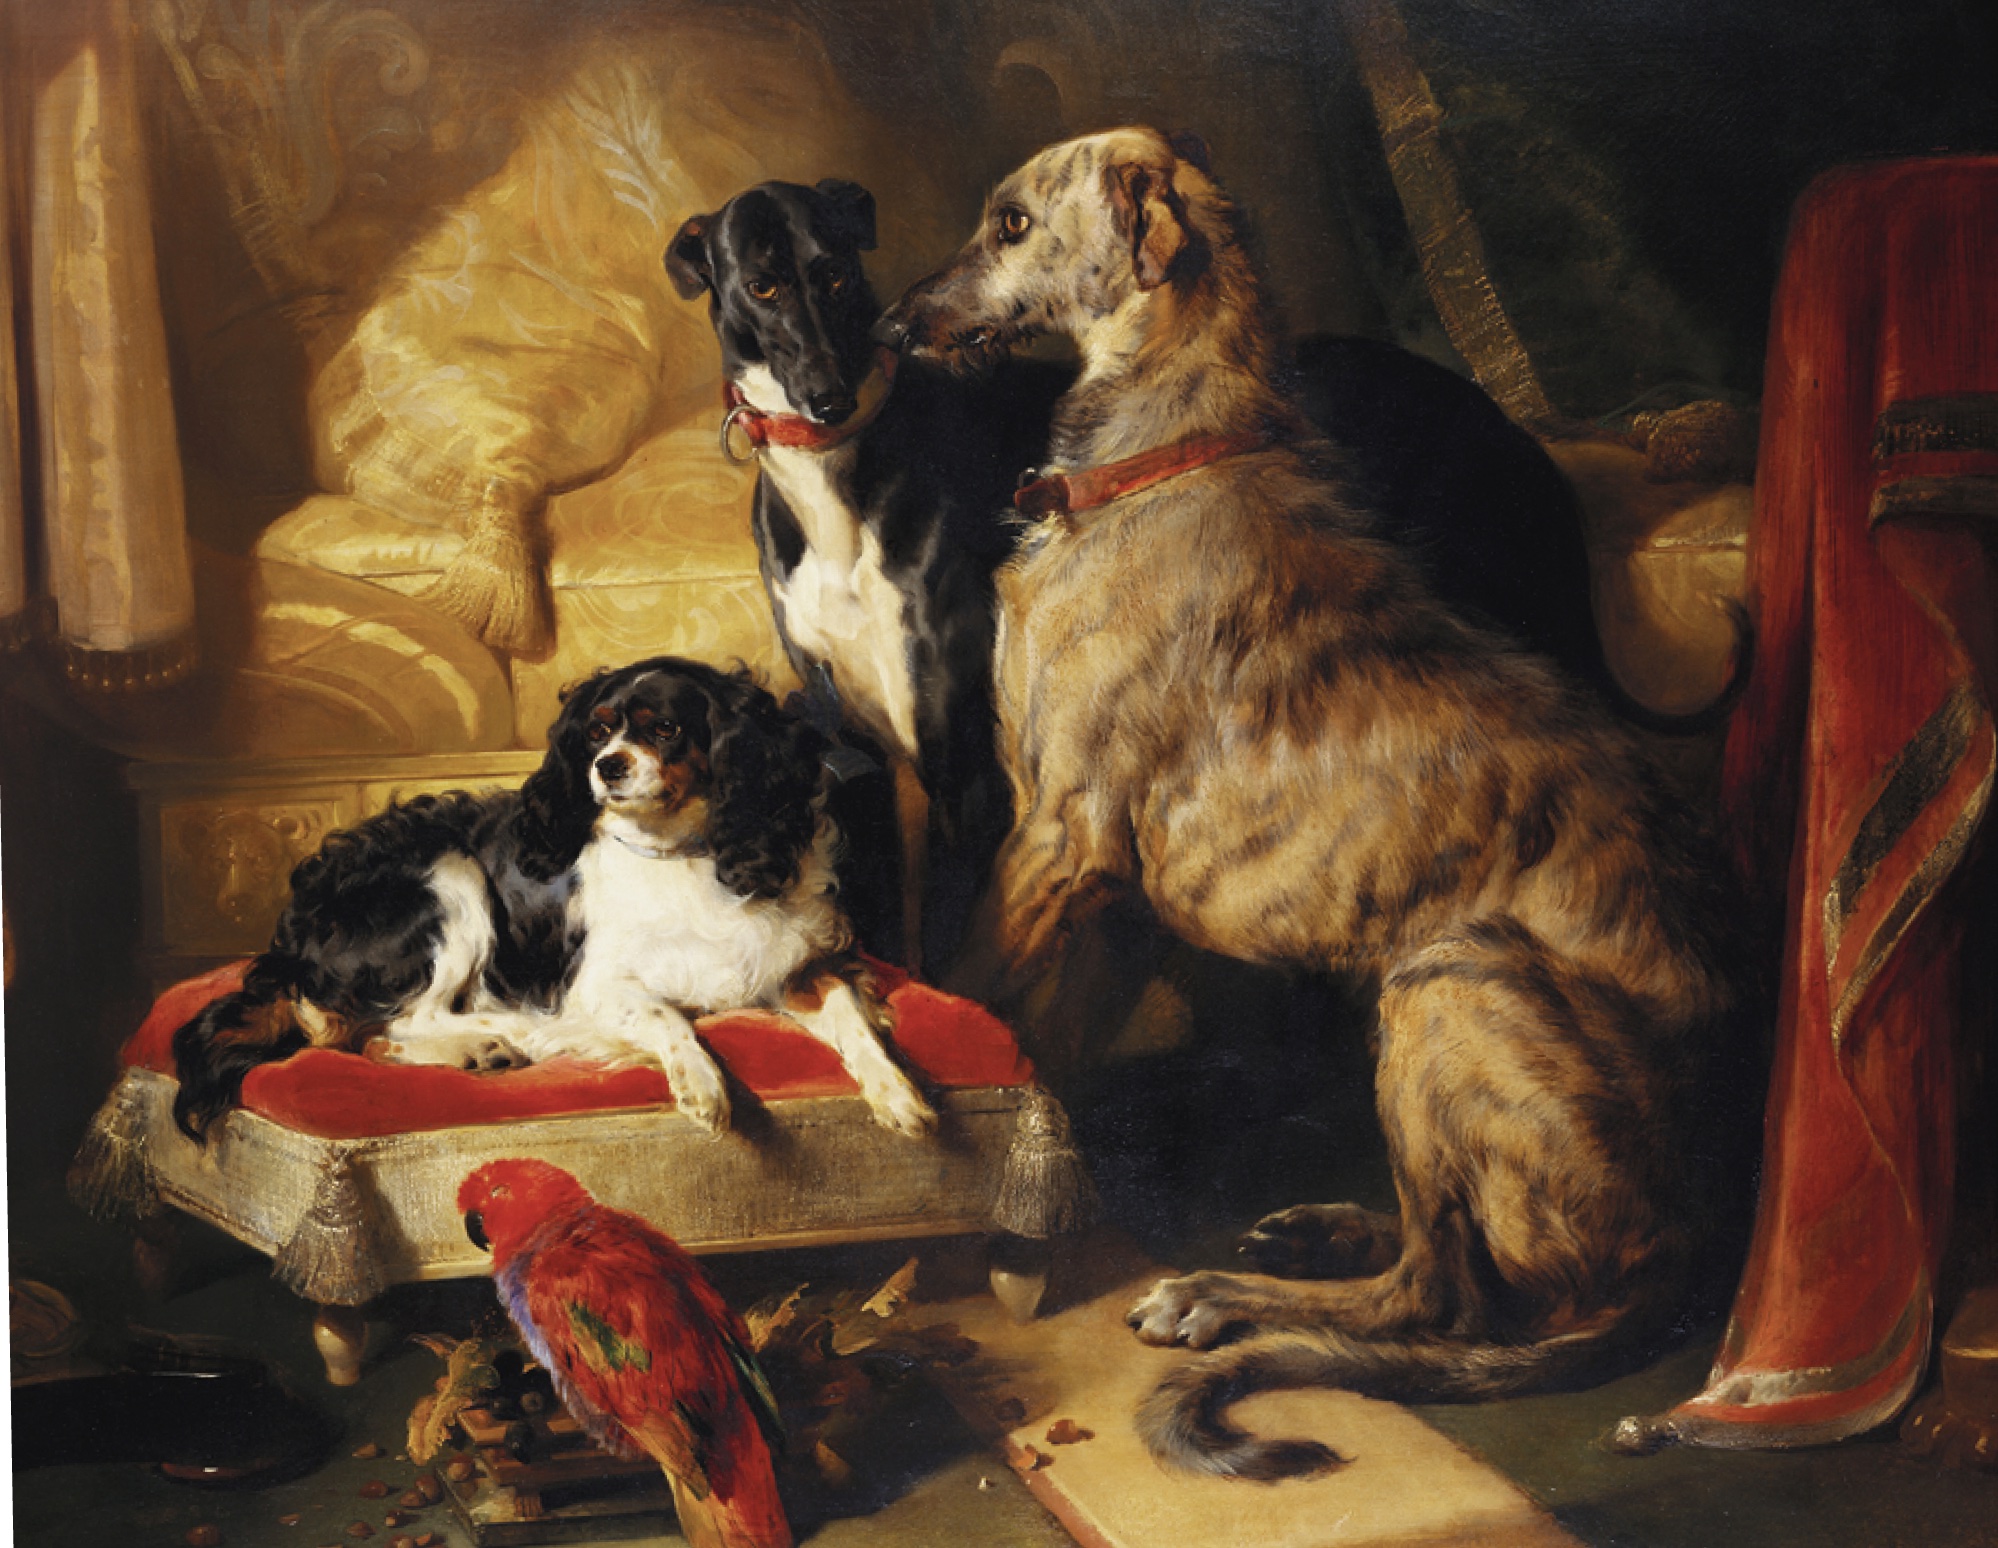 Edwin Landseer (1802-1873) 'Hector, Nero and Dash with theParrot Lory', 1838